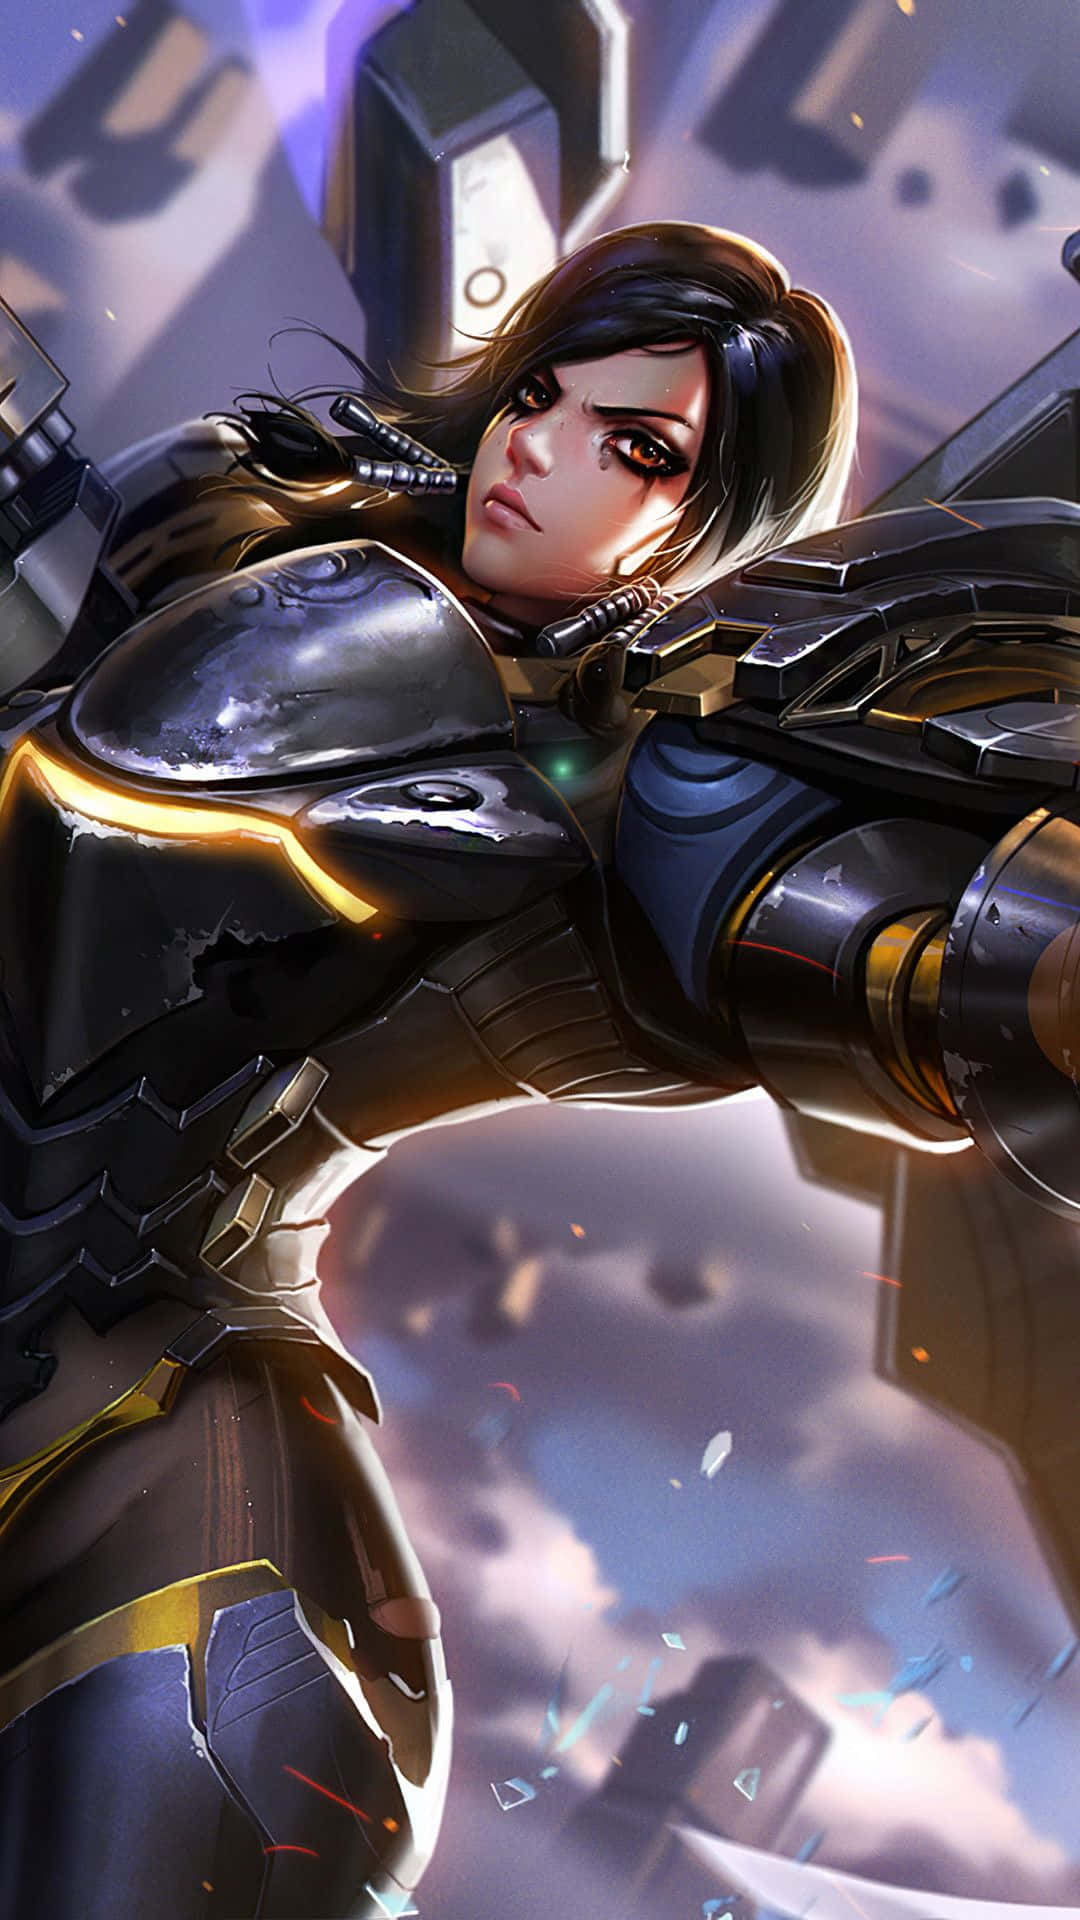 Overwatch Pharah soaring high in action Wallpaper